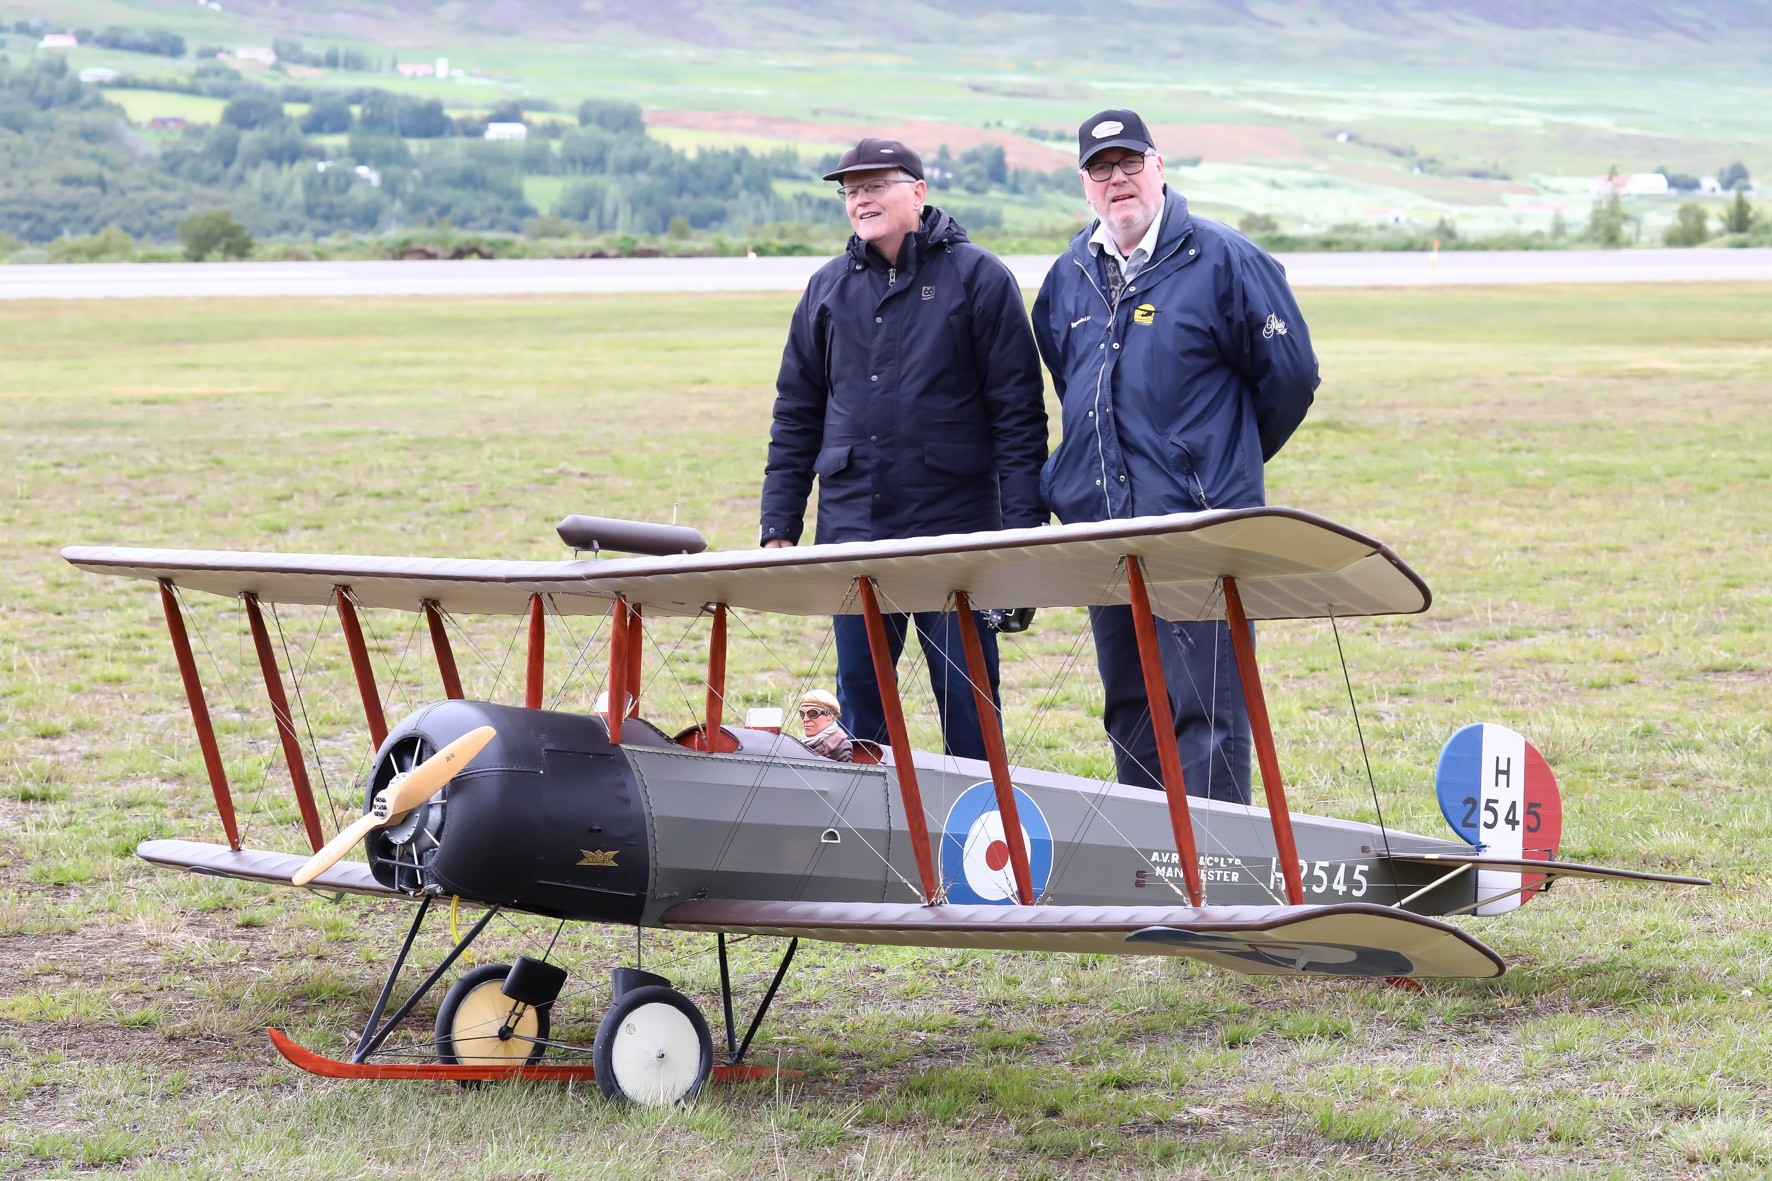 The model of Avro 504K, the first plane to fly in Iceland 3 sept. 1919 with the creator of the model Guðjón Ólafsson and pilot of the model Jón Ólafur Jónsson // Source: Hörður Geirsson